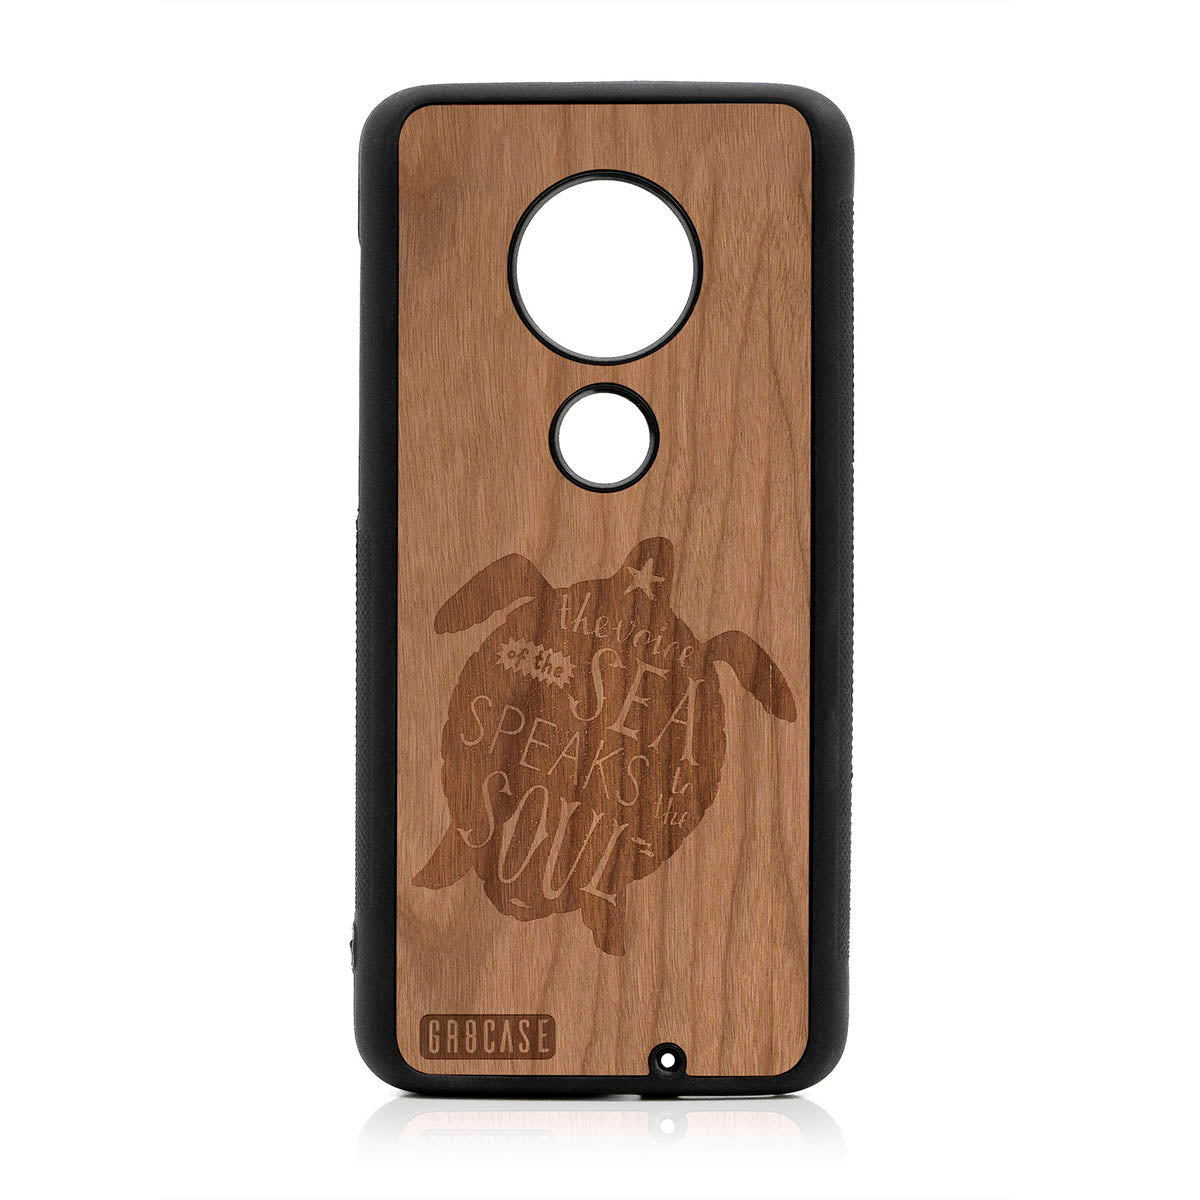 The Voice Of The Sea Speaks To The Soul (Turtle) Design Wood Case For Moto G7 Plus